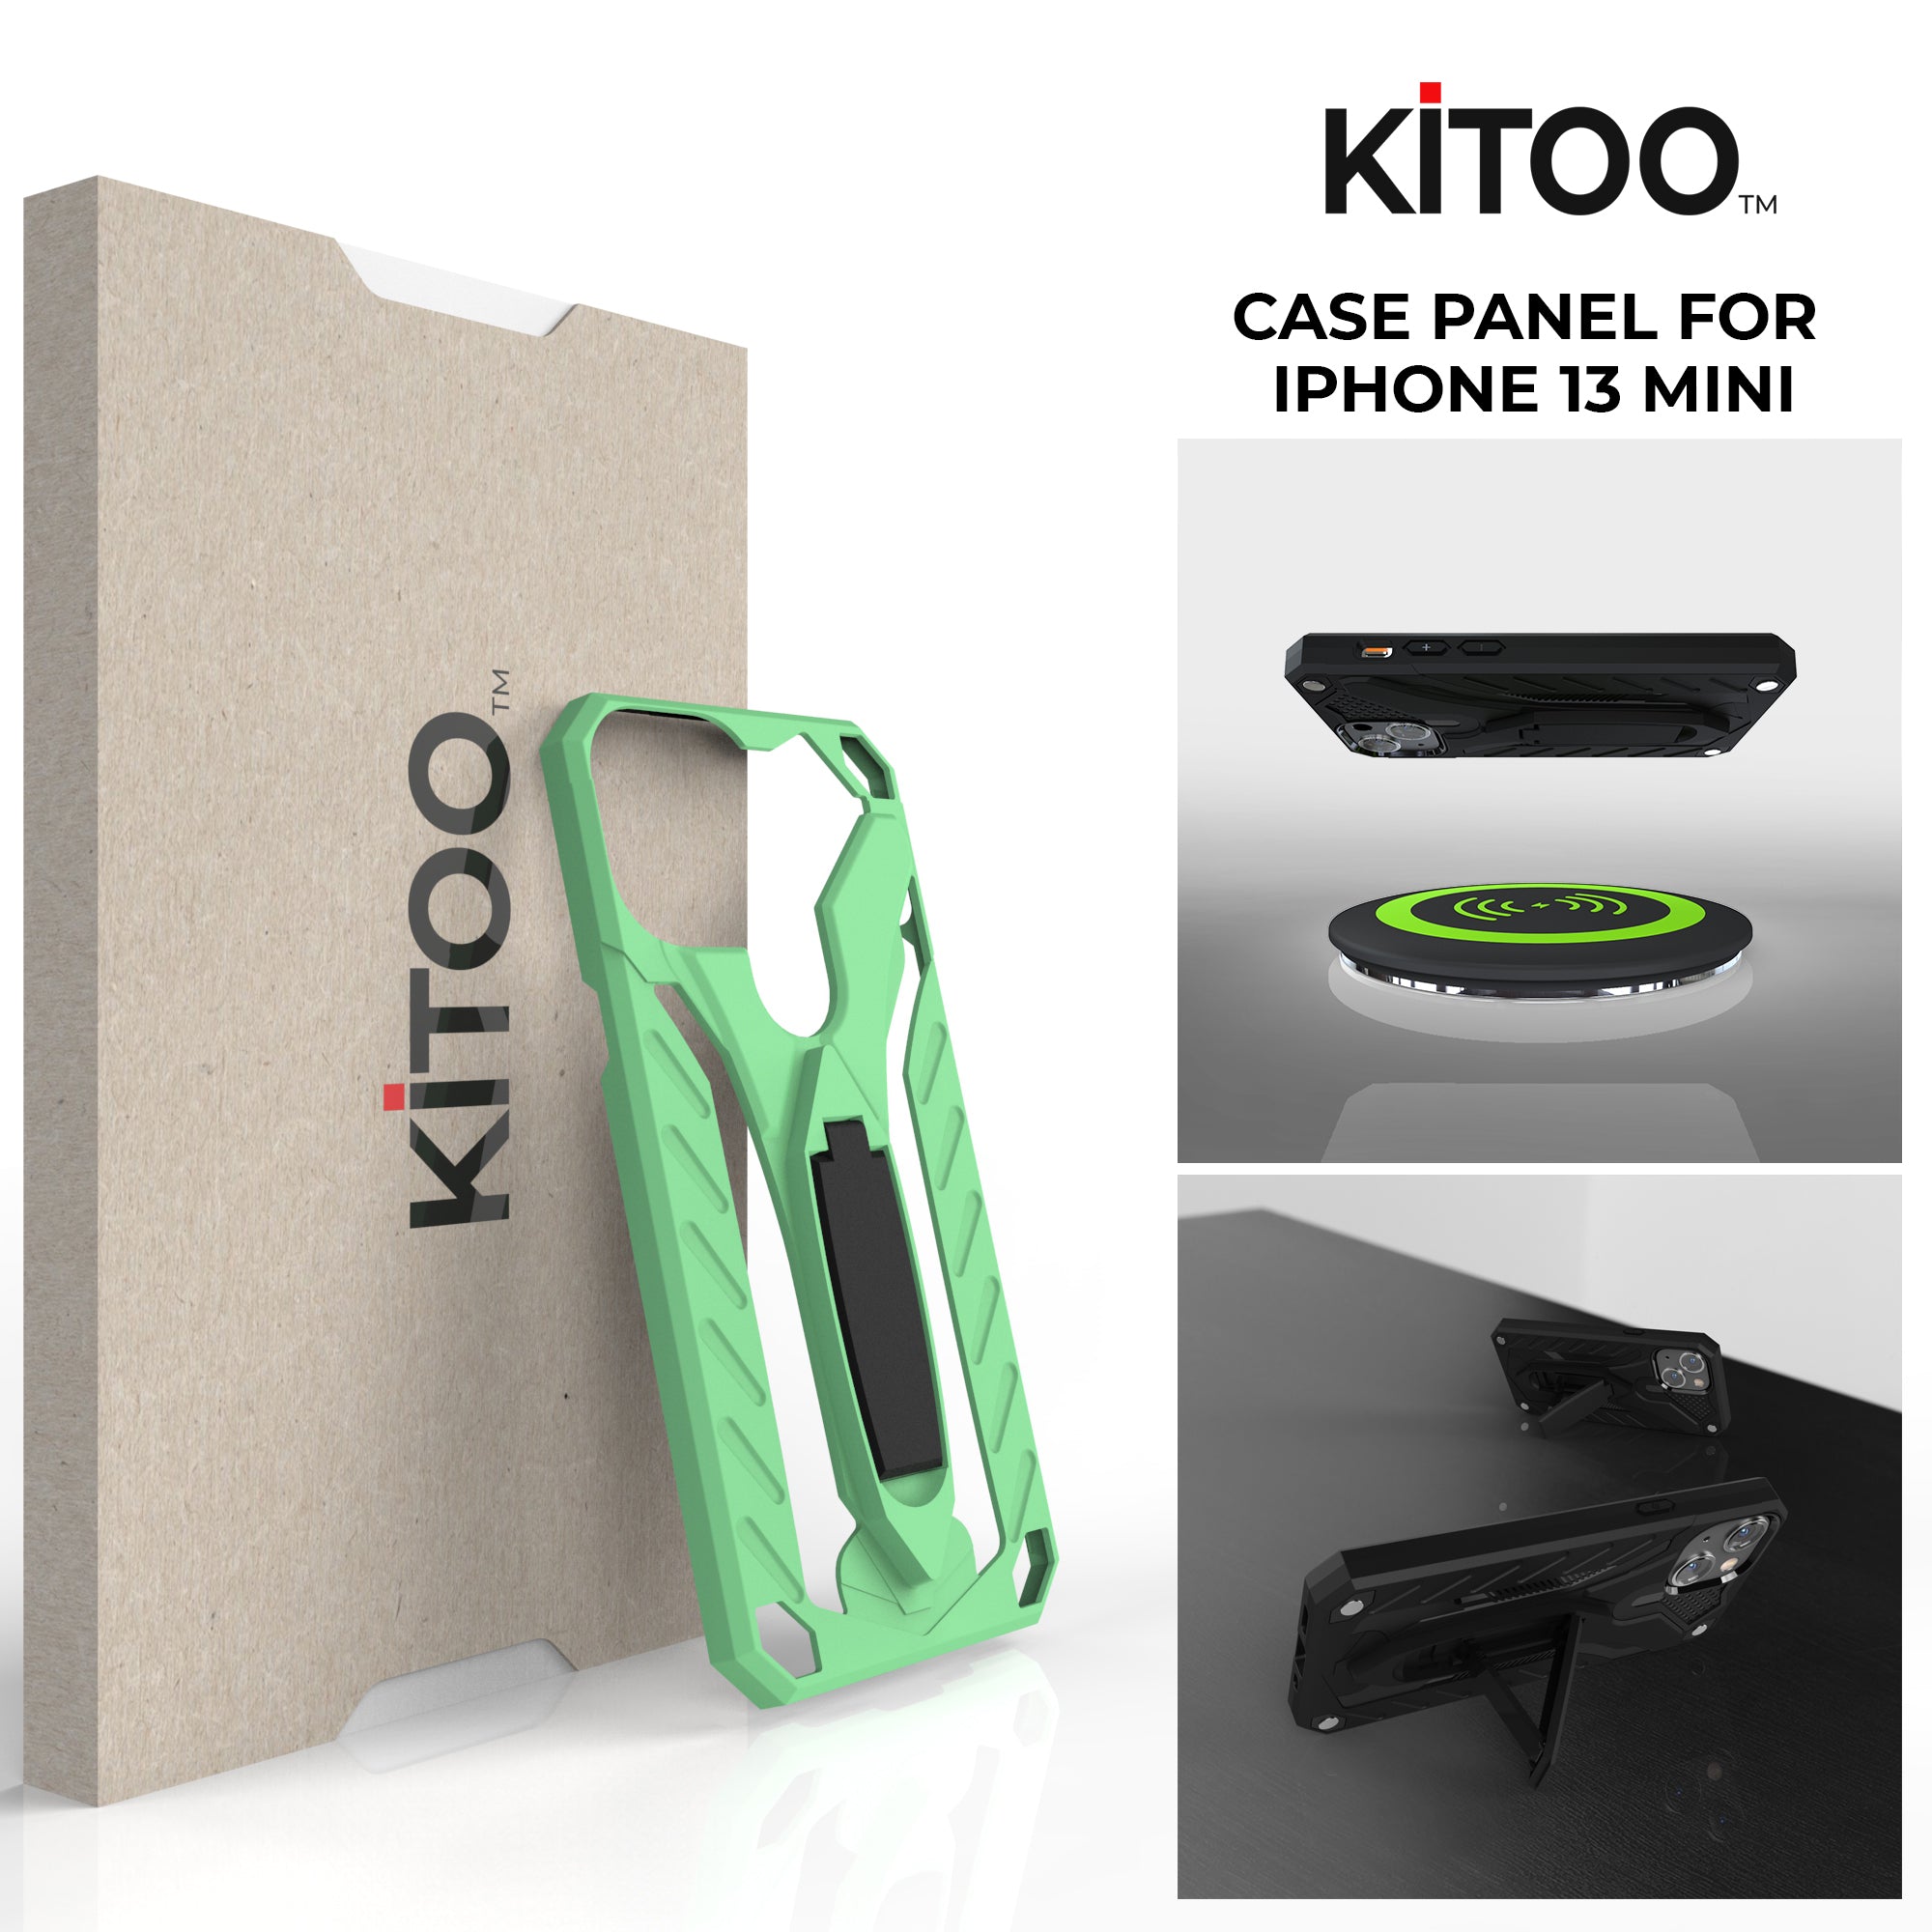 Kitoo Kickstand Panel Designed for iPhone 13 Mini case (Spare Part only) - Green